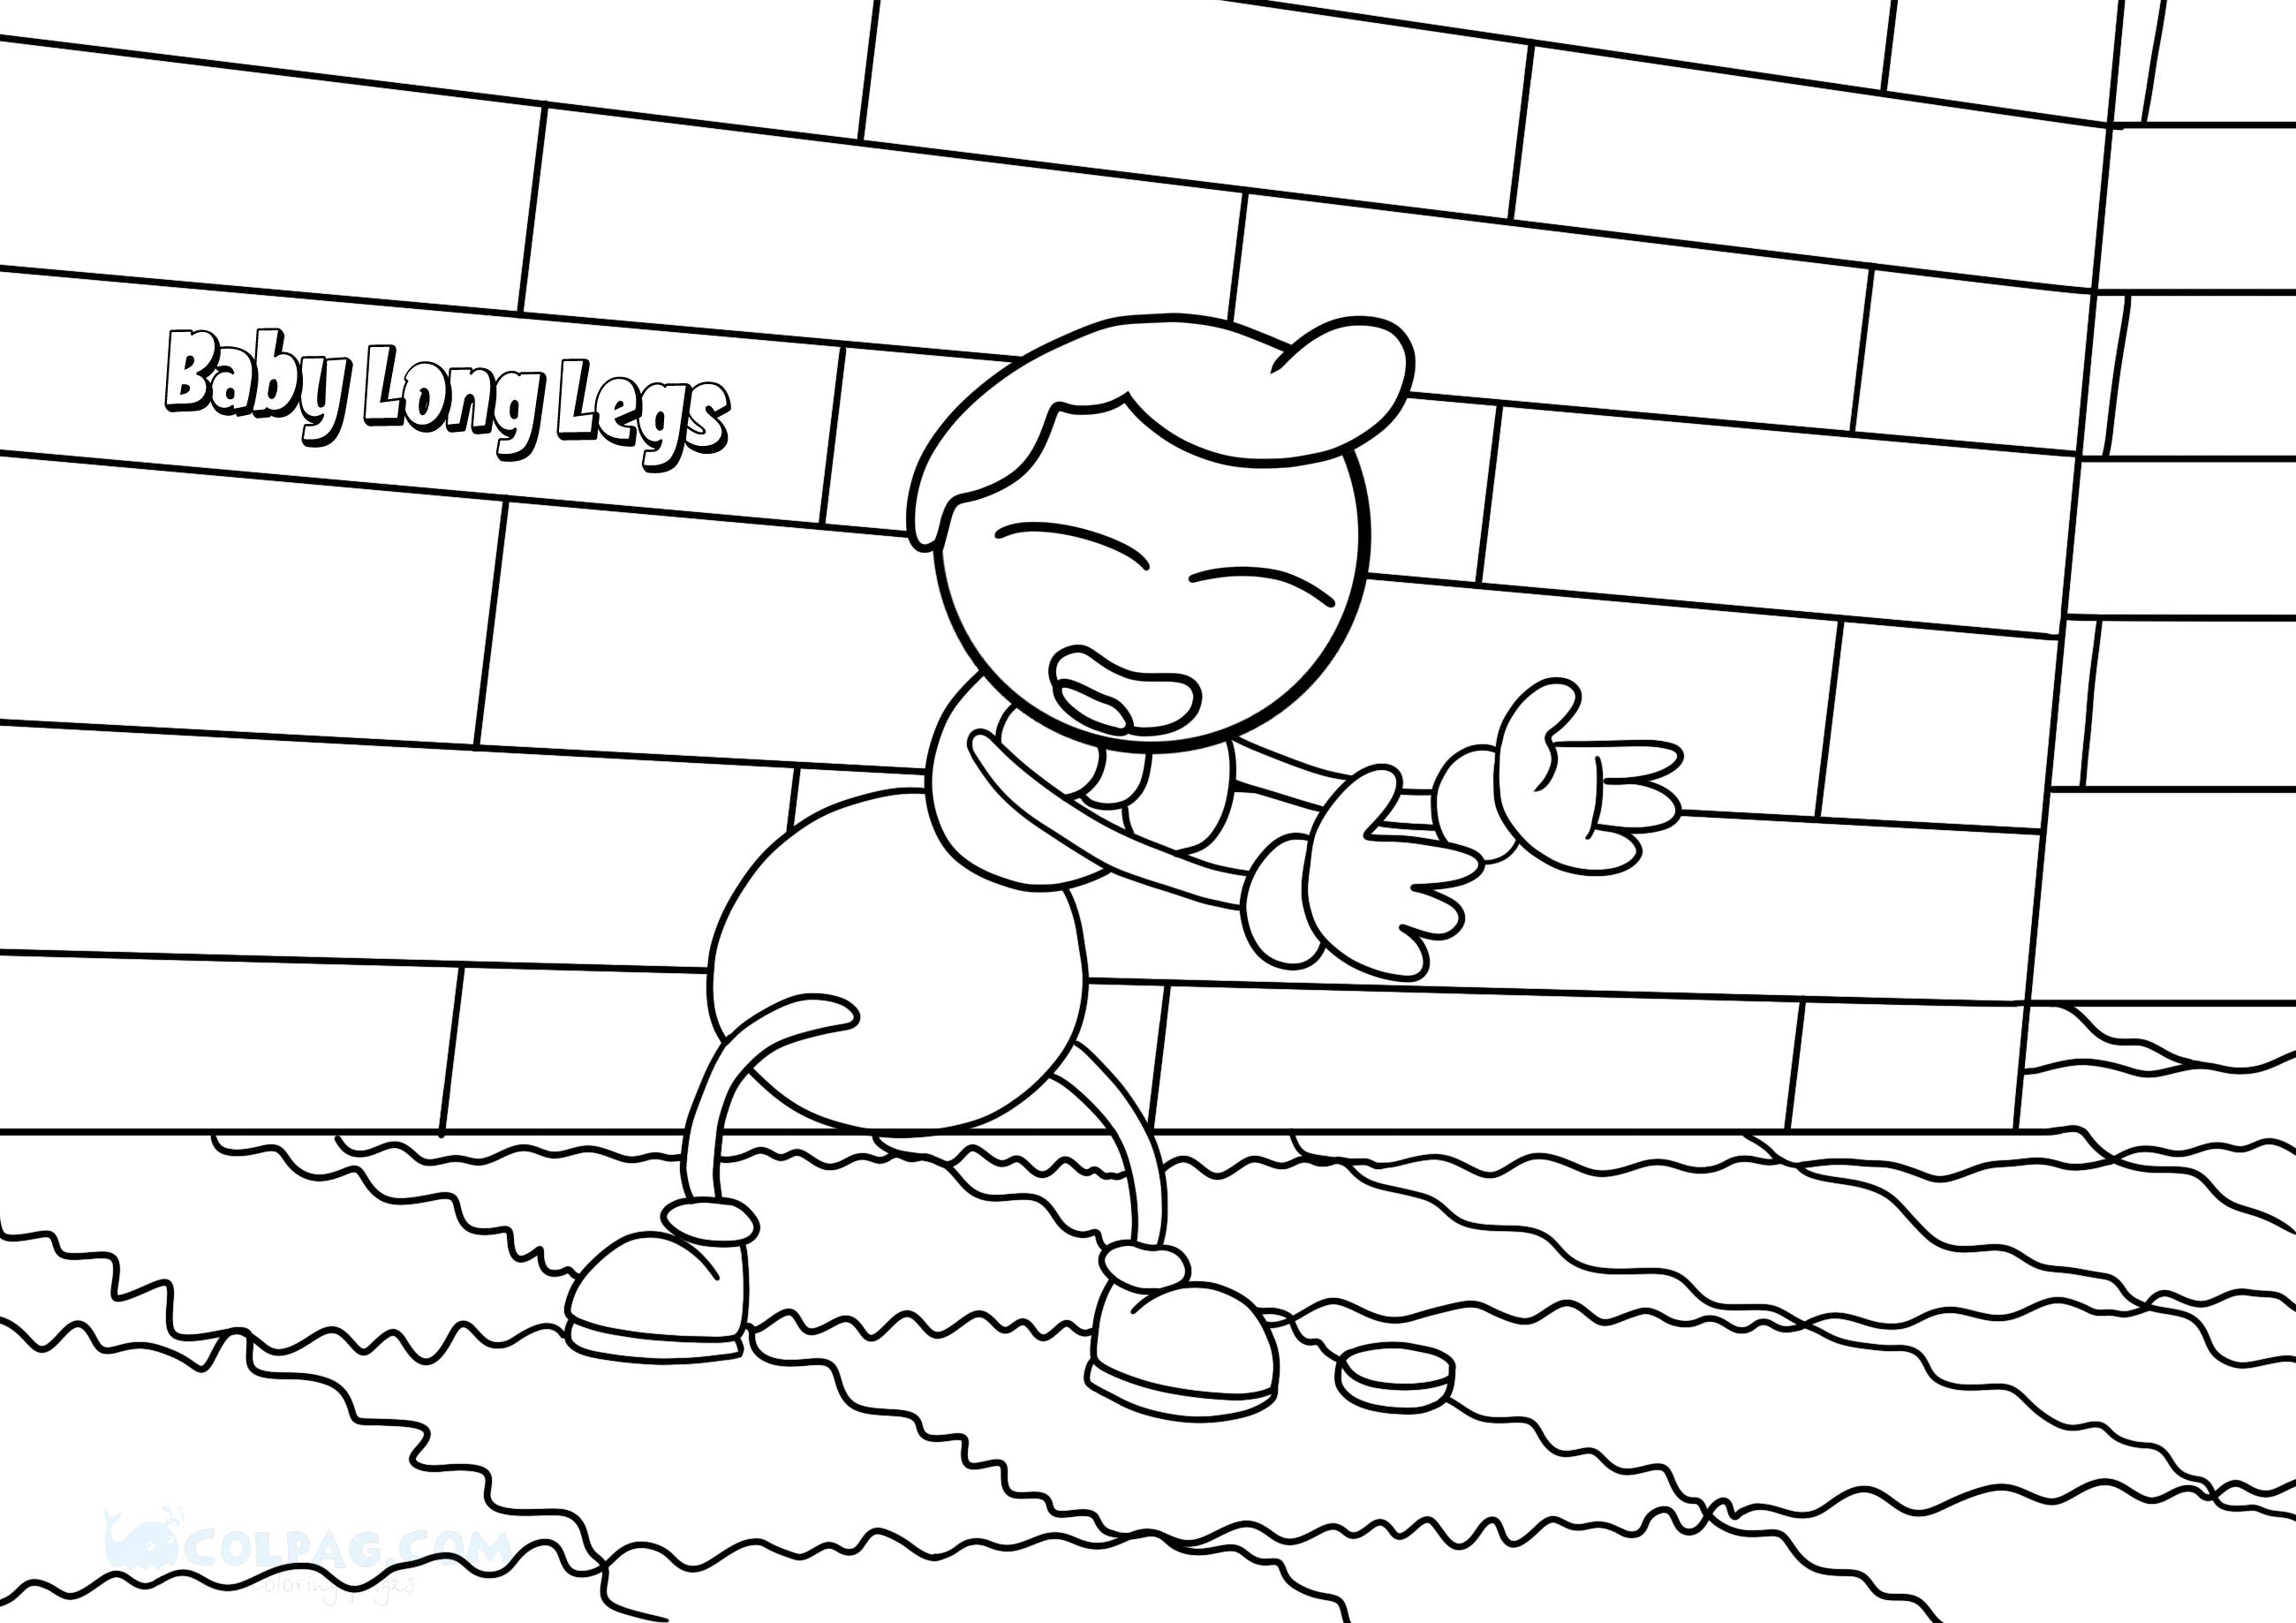 baby-long-legs-coloring-page-colpag-com-7